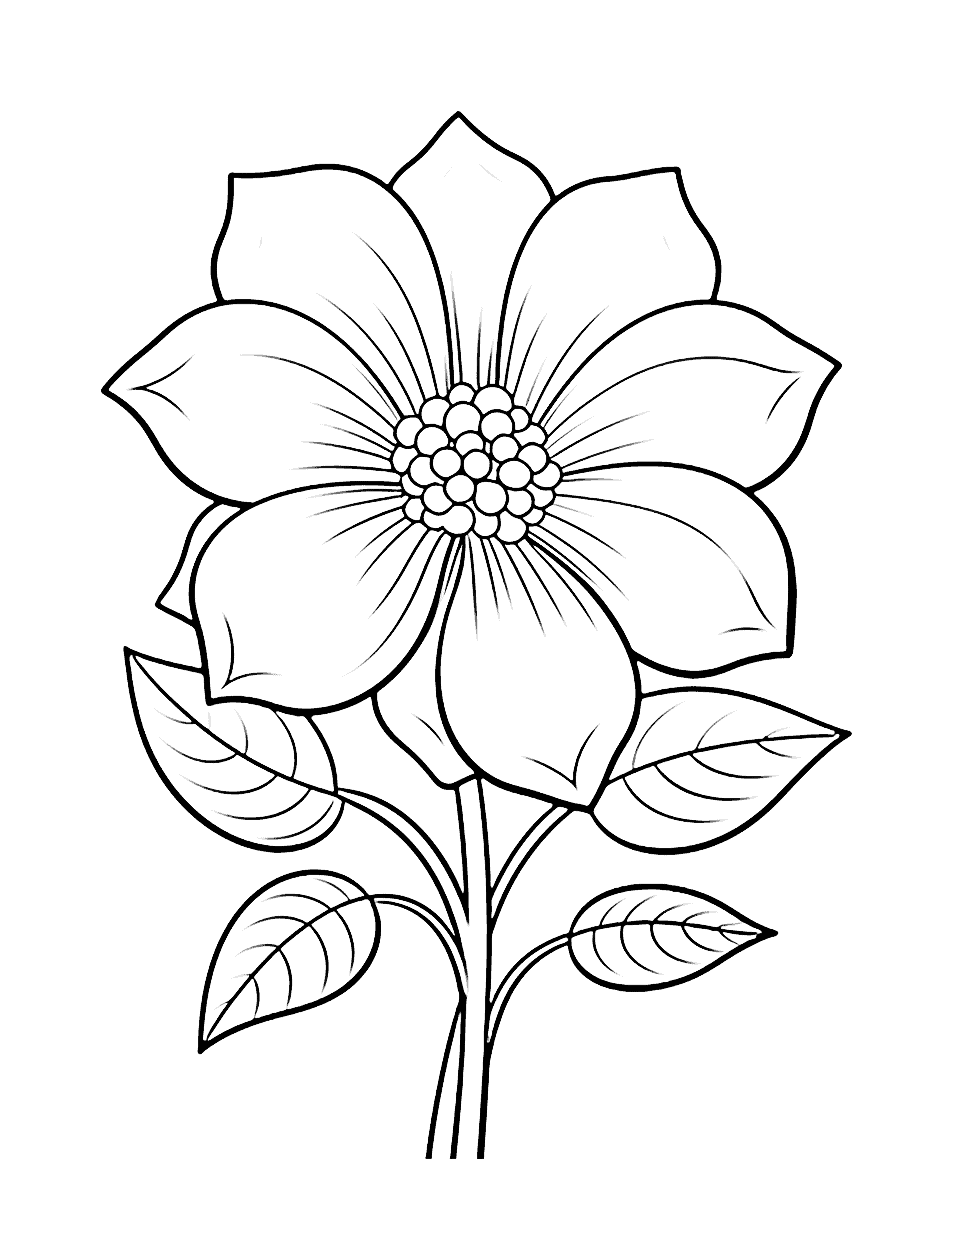 Cool Tropical Bloom Flower Coloring Page - A large, cool tropical flower design.